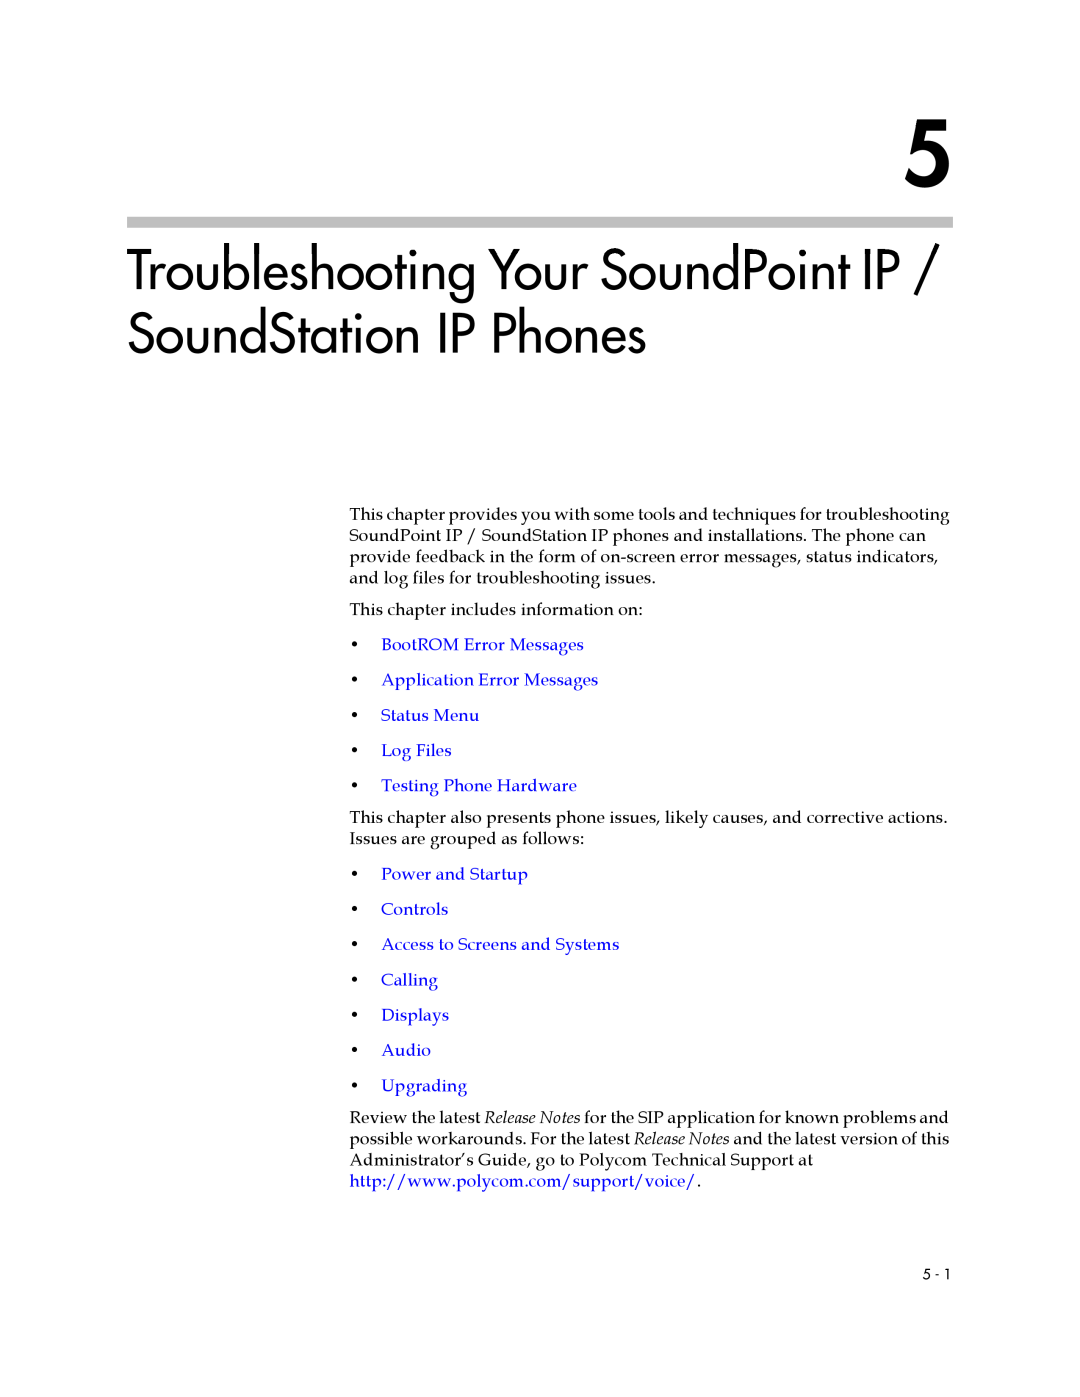 Polycom SIP 3.1 manual Troubleshooting Your SoundPoint IP / SoundStation IP Phones, Log Files Testing Phone Hardware 